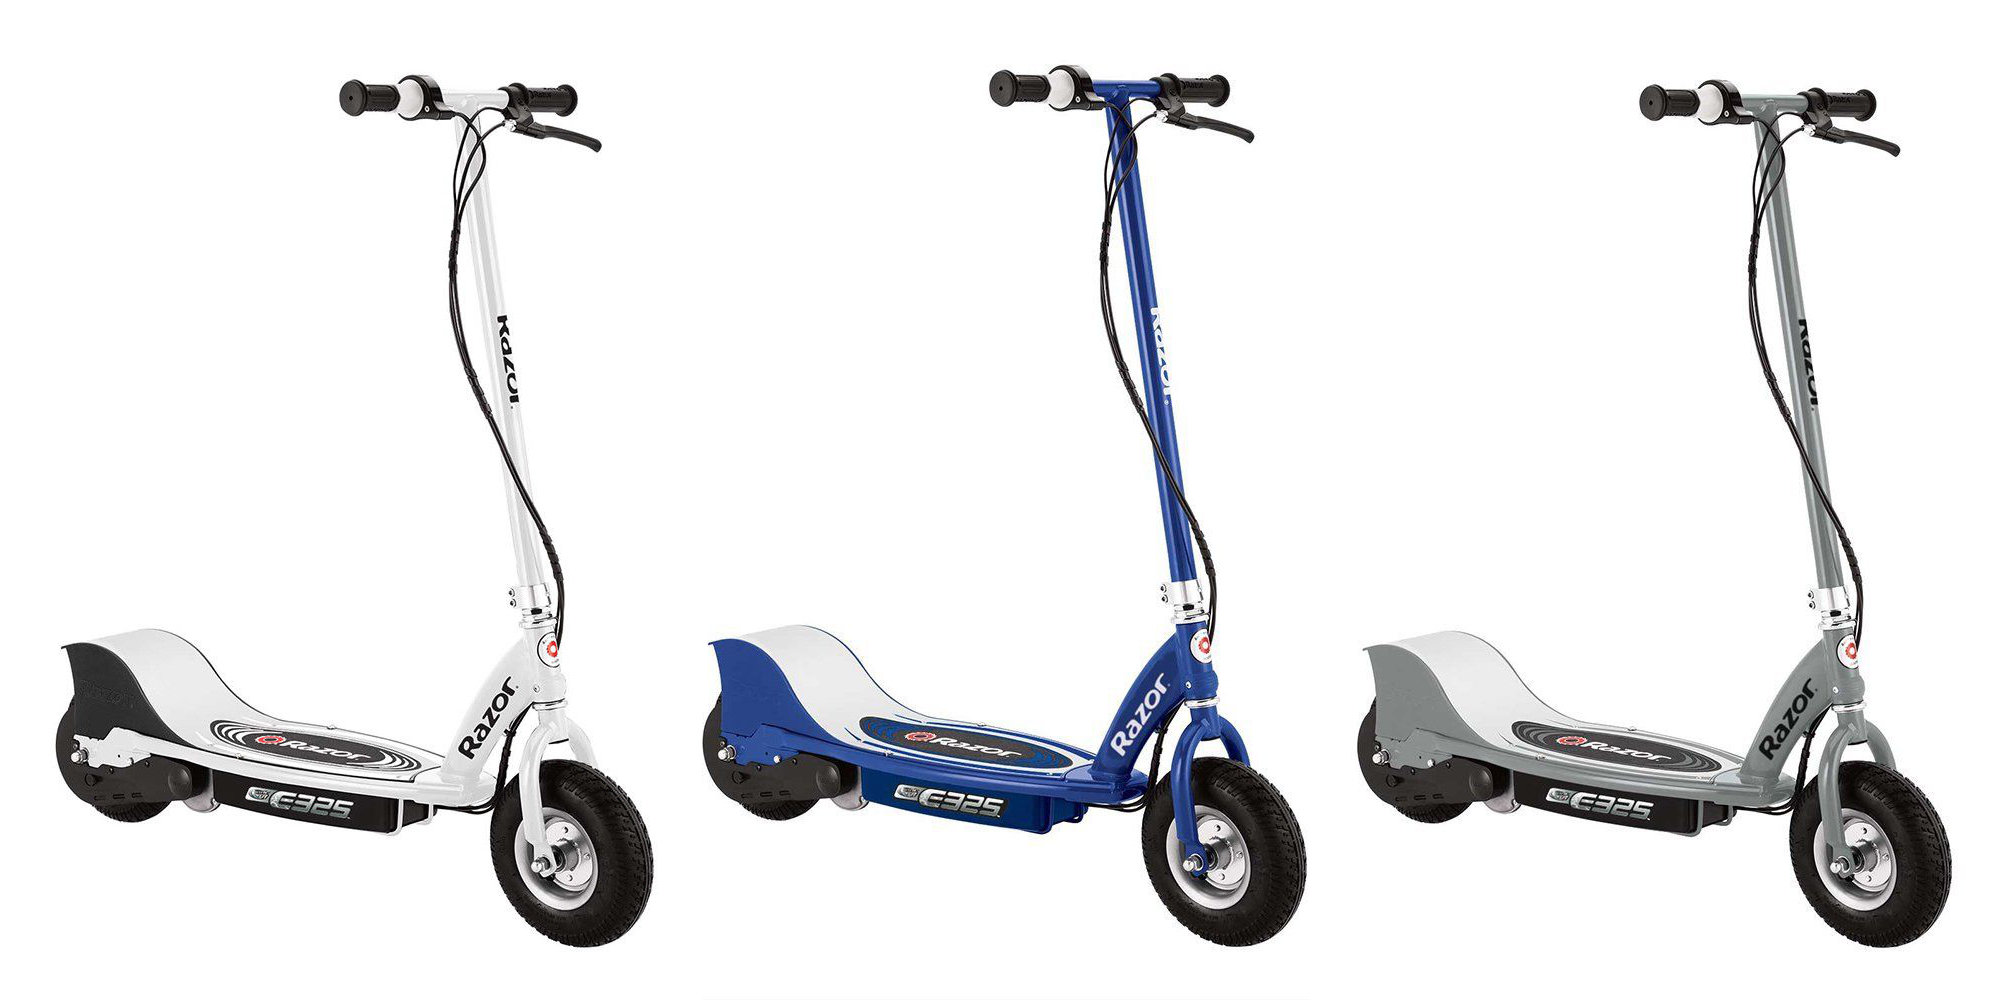 Razor's E325 Electric Scooter drops to $191 shipped (Reg. $250+) - 9to5Toys